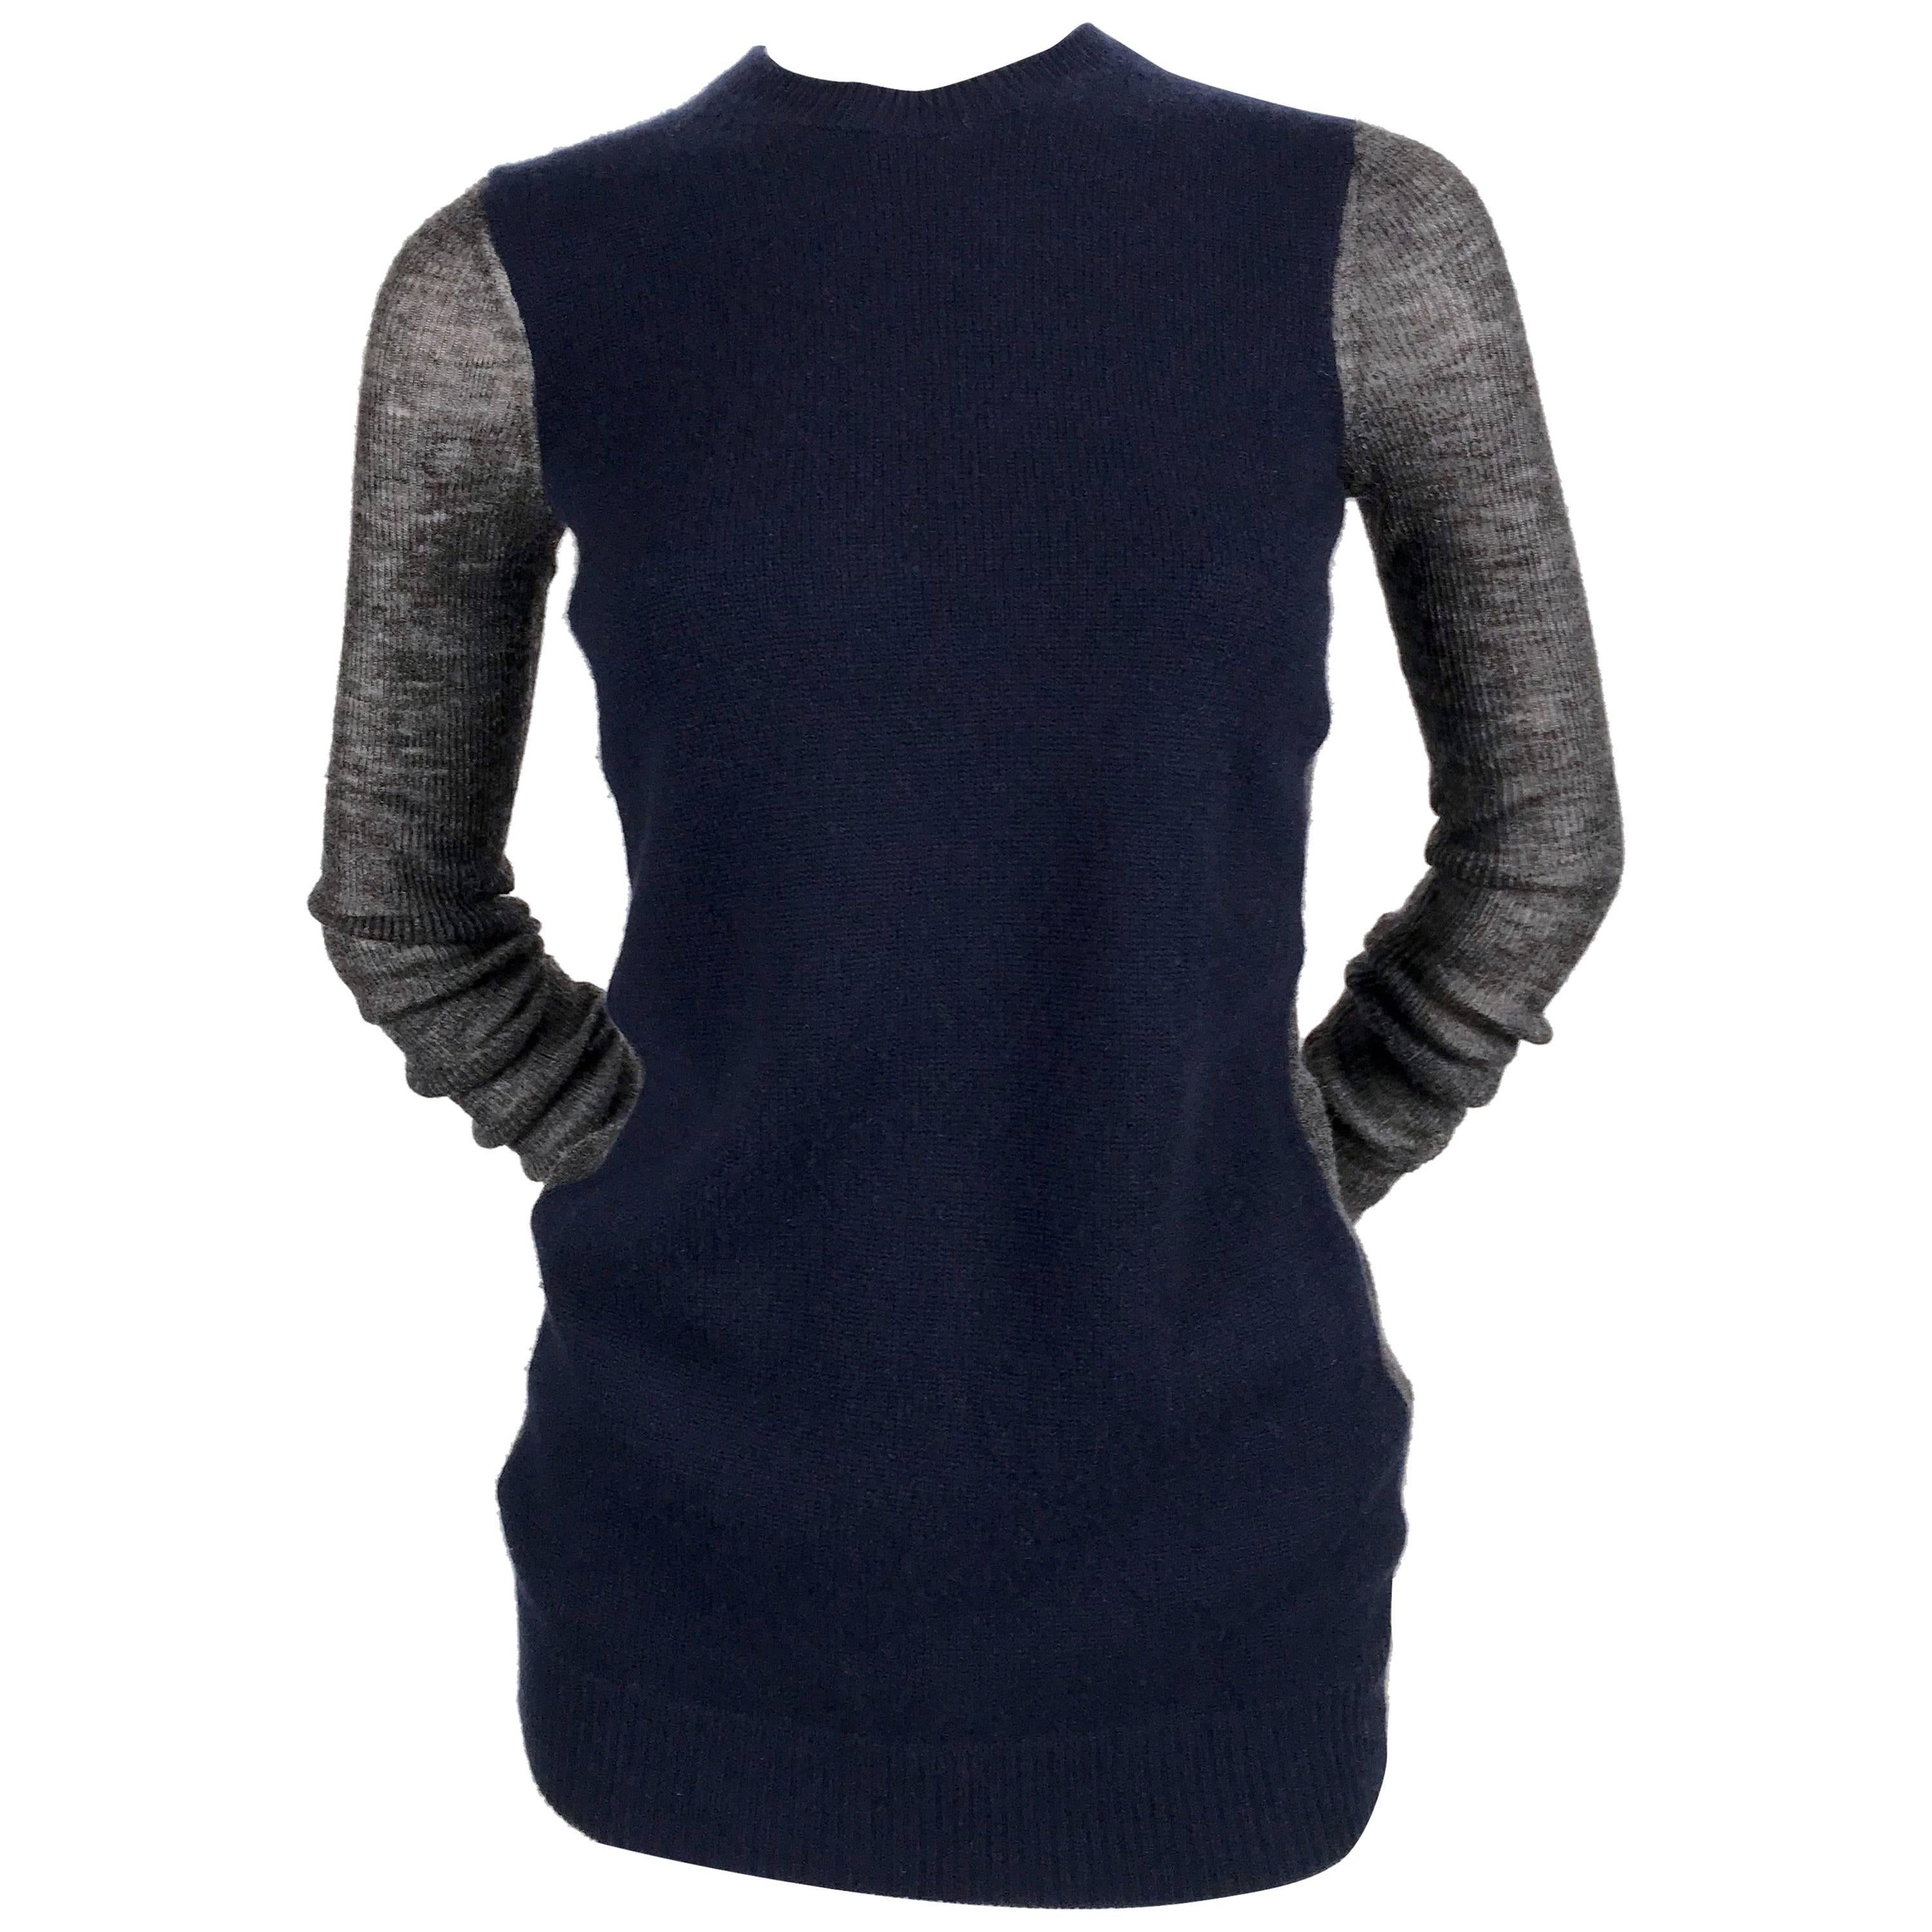 CELINE by PHOEBE PHILO navy and grey cashmere and alpaca sheer sweater